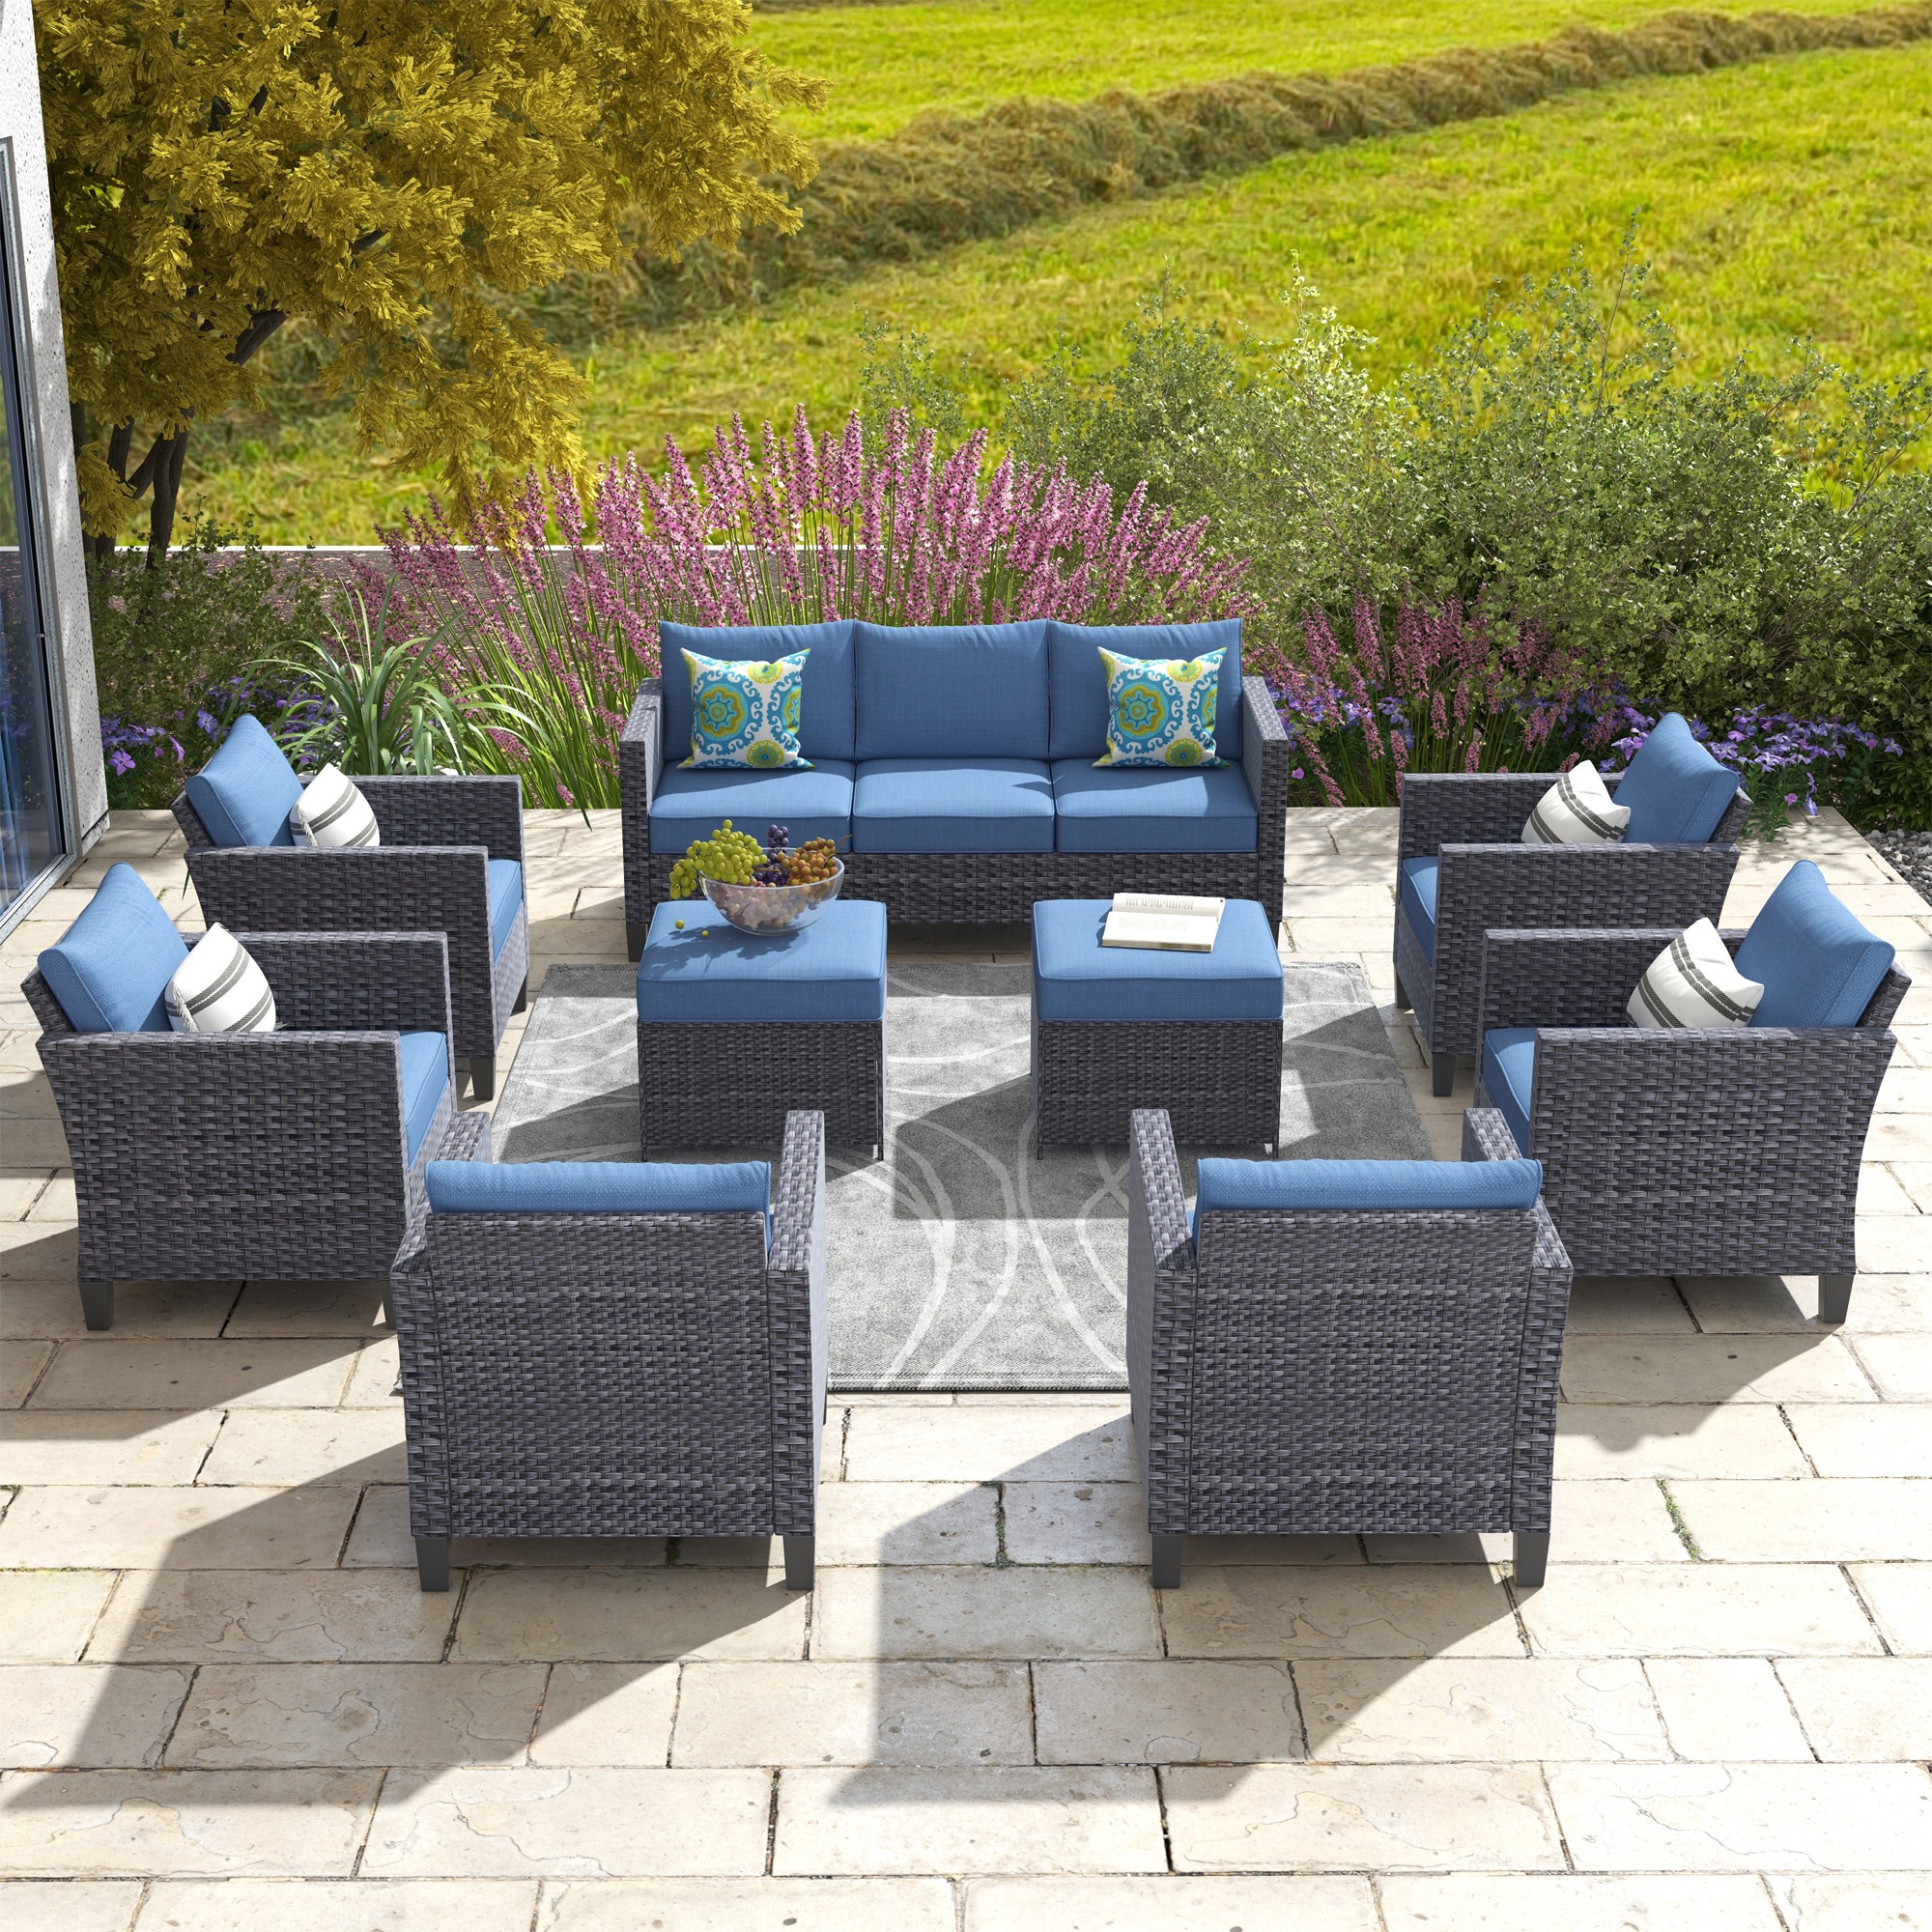 Ovios 9 Piece Outdoor Furniture All Weather Patio Conversation Chair Set Wicker Sectional Sofa with Soft Cushions for Garden Backyard (Denim Blue) - image 1 of 7